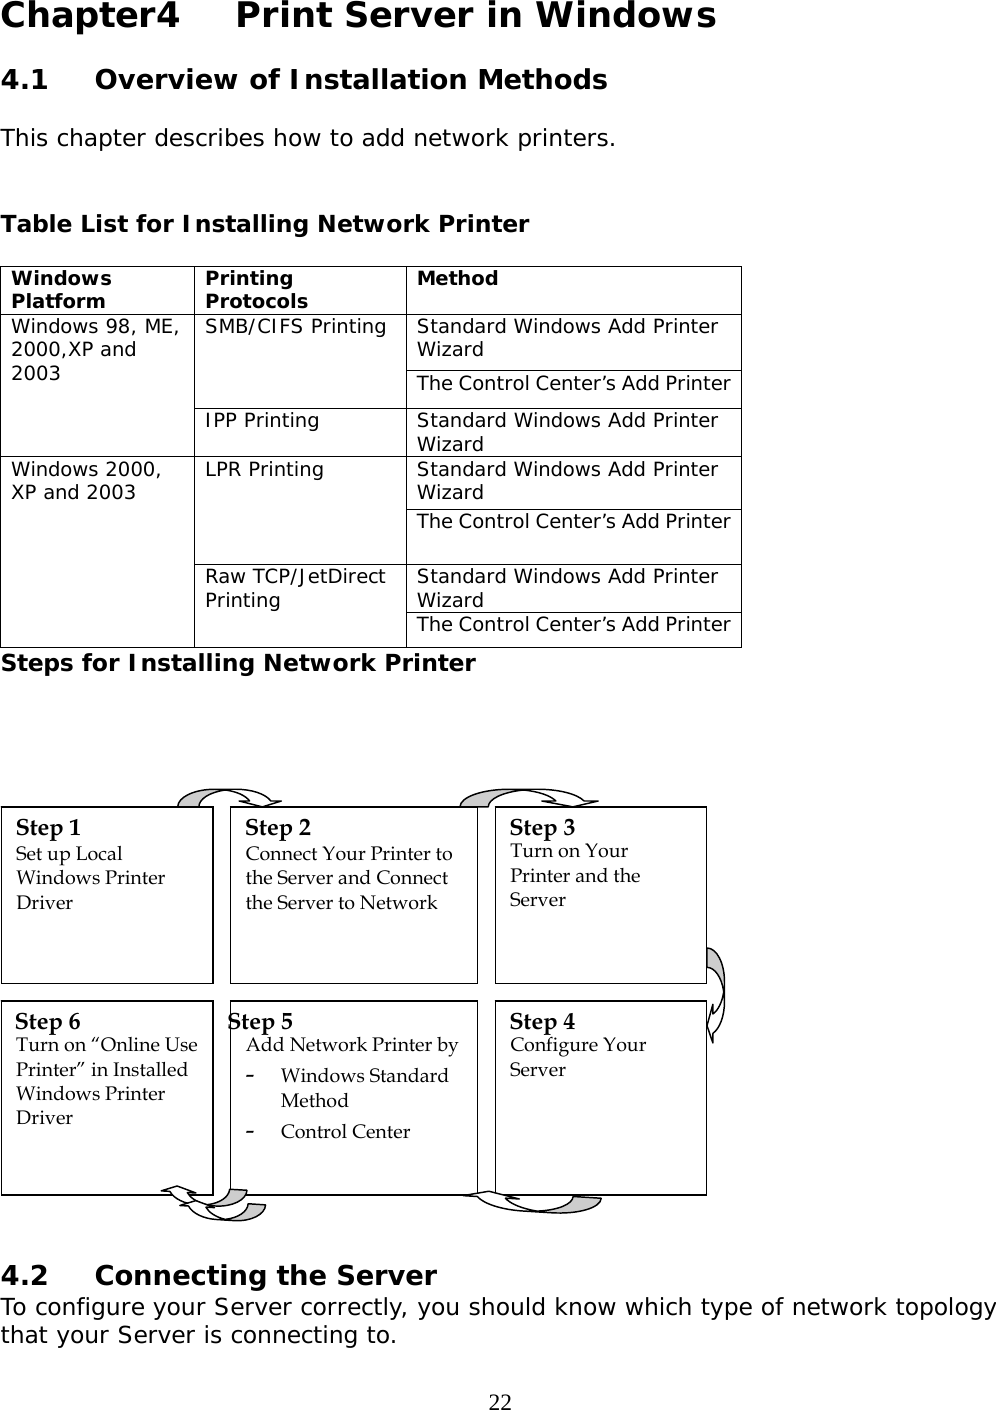     22 Chapter4   Print Server in Windows  4.1  Overview of Installation Methods  This chapter describes how to add network printers.   Table List for Installing Network Printer  Windows Platform  Printing Protocols  Method  Standard Windows Add Printer Wizard SMB/CIFS Printing The Control Center’s Add Printer Windows 98, ME, 2000,XP and 2003 IPP Printing  Standard Windows Add Printer Wizard Standard Windows Add Printer Wizard LPR Printing The Control Center’s Add Printer Standard Windows Add Printer Wizard Windows 2000, XP and 2003  Raw TCP/JetDirect Printing  The Control Center’s Add Printer Steps for Installing Network Printer     4.2  Connecting the Server To configure your Server correctly, you should know which type of network topology that your Server is connecting to.    Set up Local Windows Printer Driver  Connect Your Printer to the Server and Connect the Server to Network  Add Network Printer by  - Windows Standard Method - Control Center   Configure Your Server   Turn on Your Printer and the Server    Turn on “Online Use Printer” in Installed Windows Printer Driver  Step 1  Step 2  Step 3 Step 4 Step 5 Step 6 